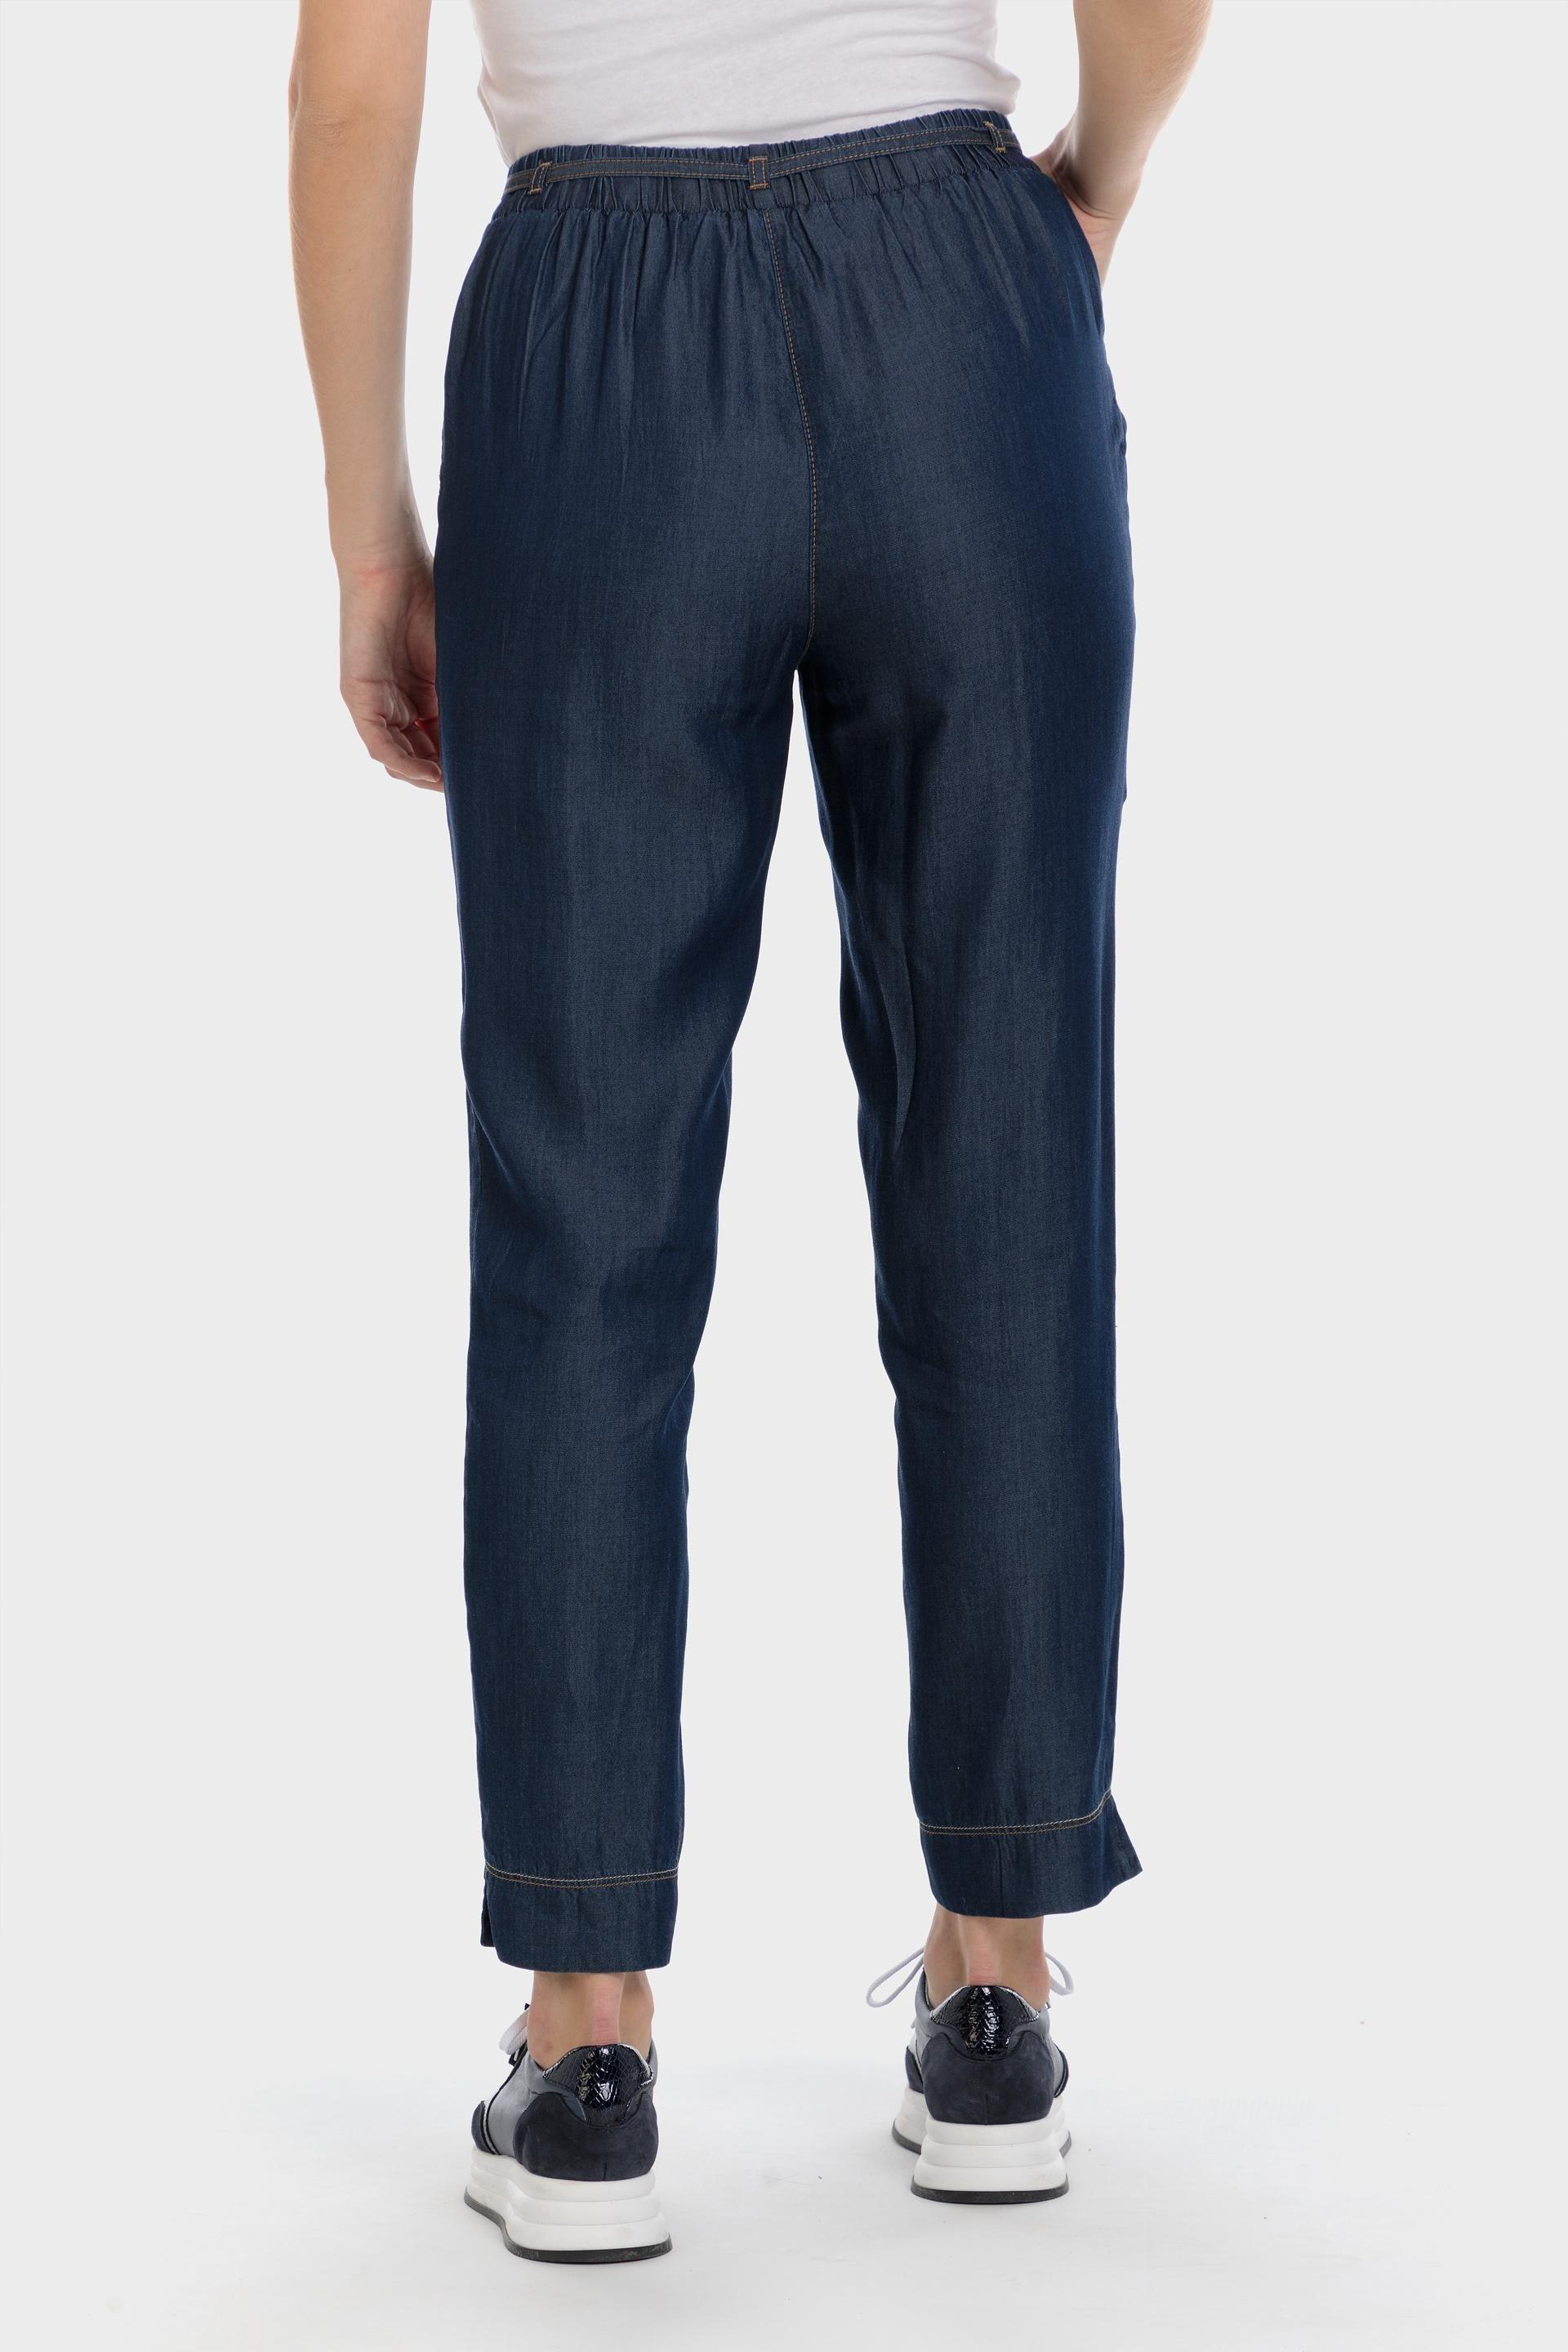 Punt Roma - Navy Lyocell Trousers